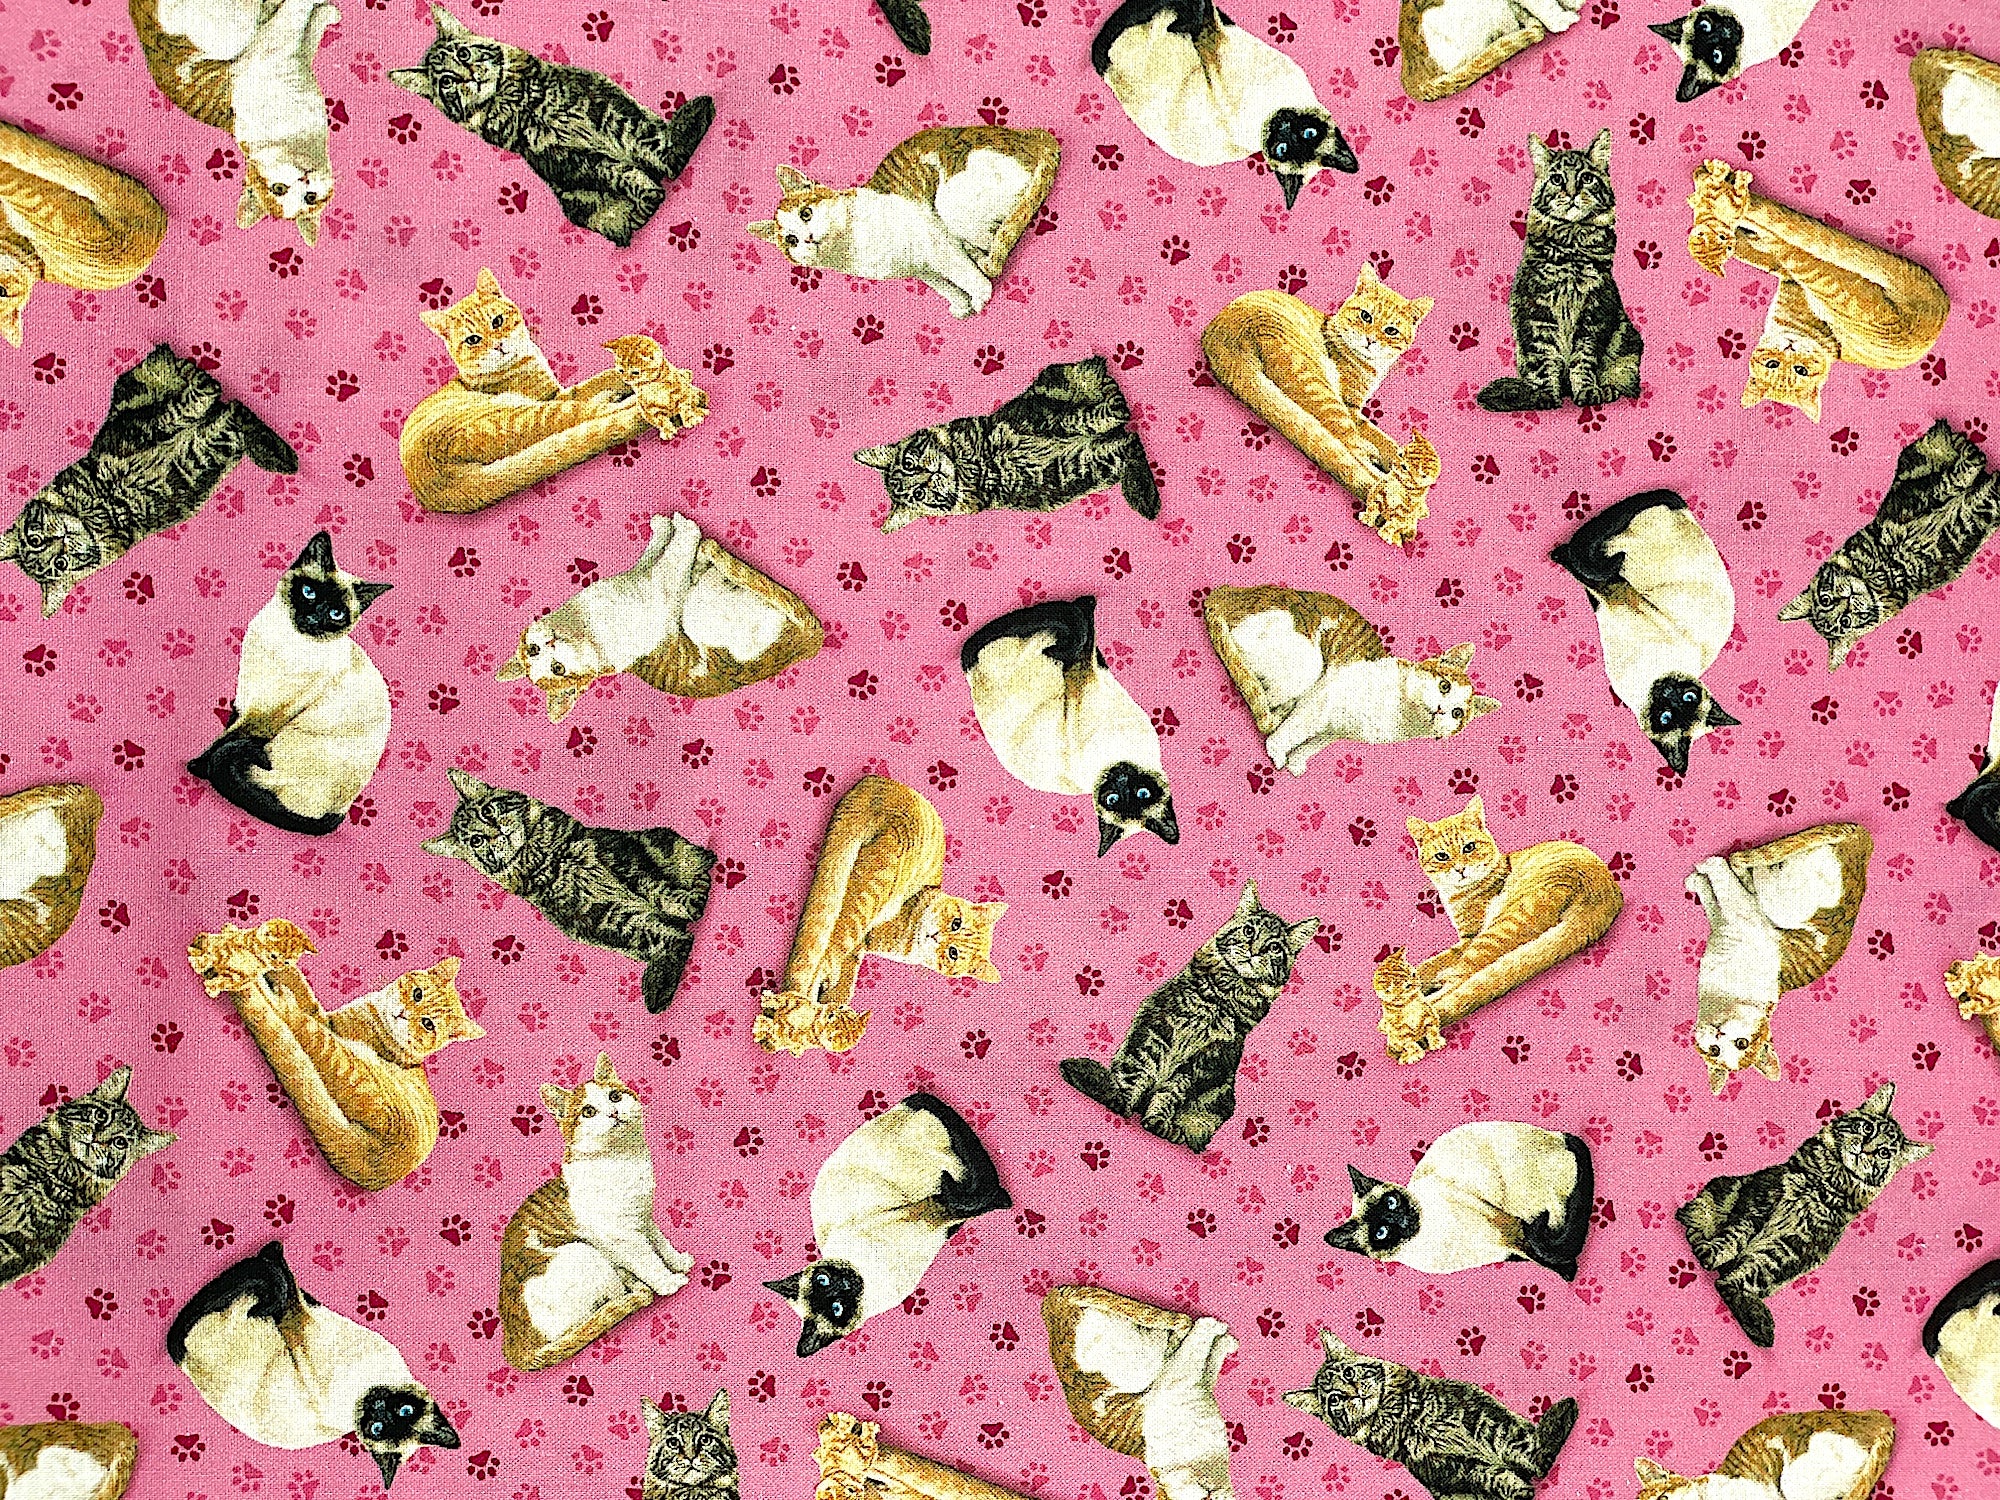 Cats sitting on a pink fabric.